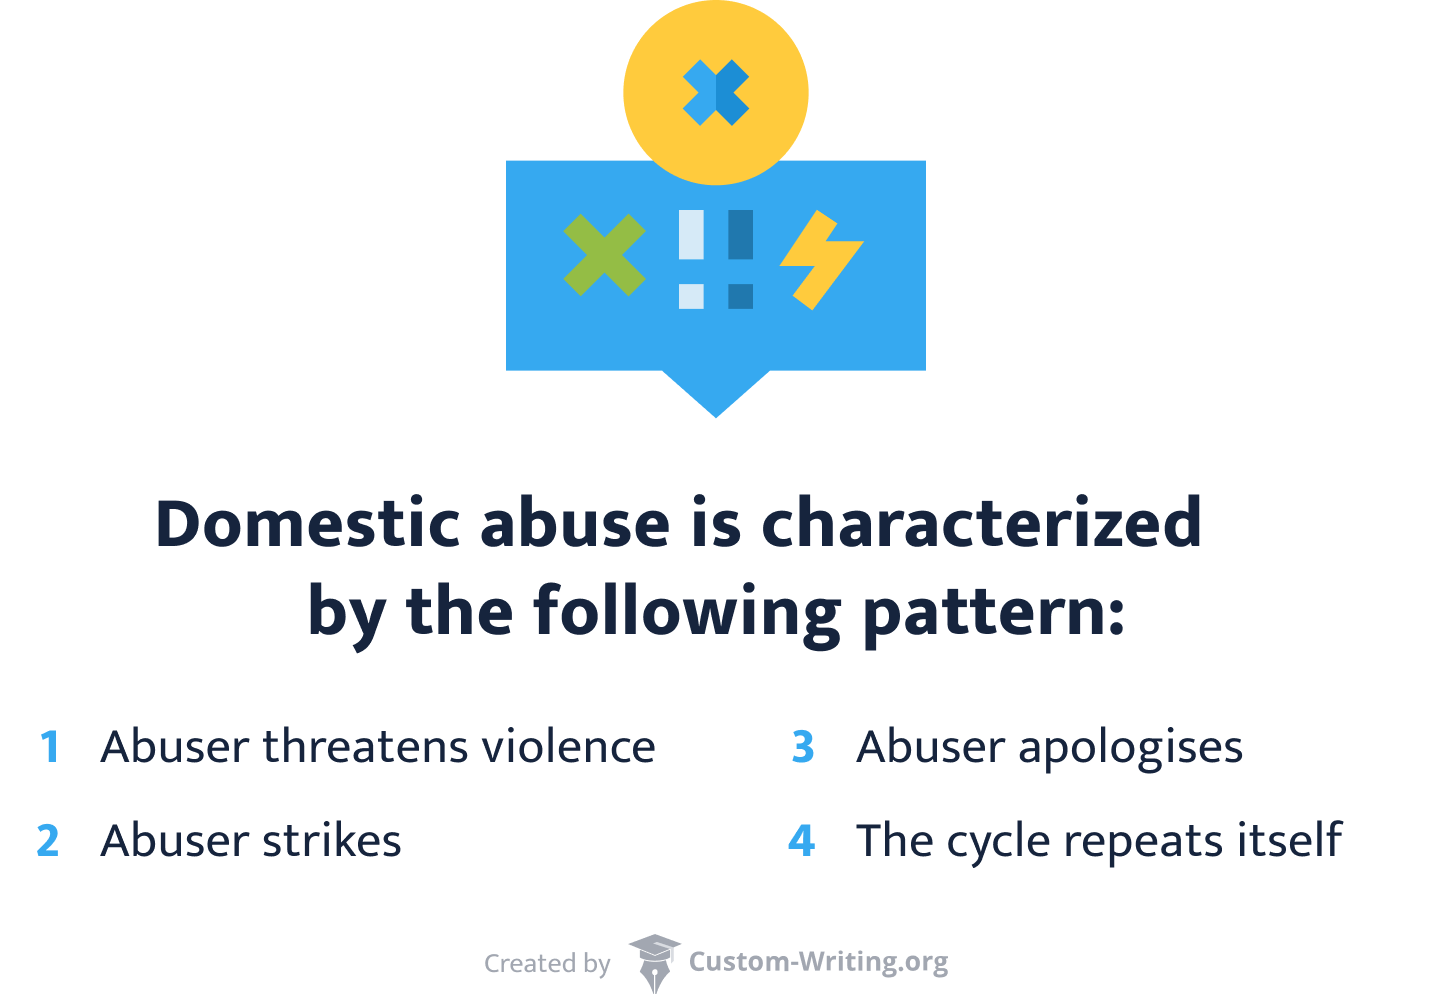 Domestic abuse is characterized by the following pattern.